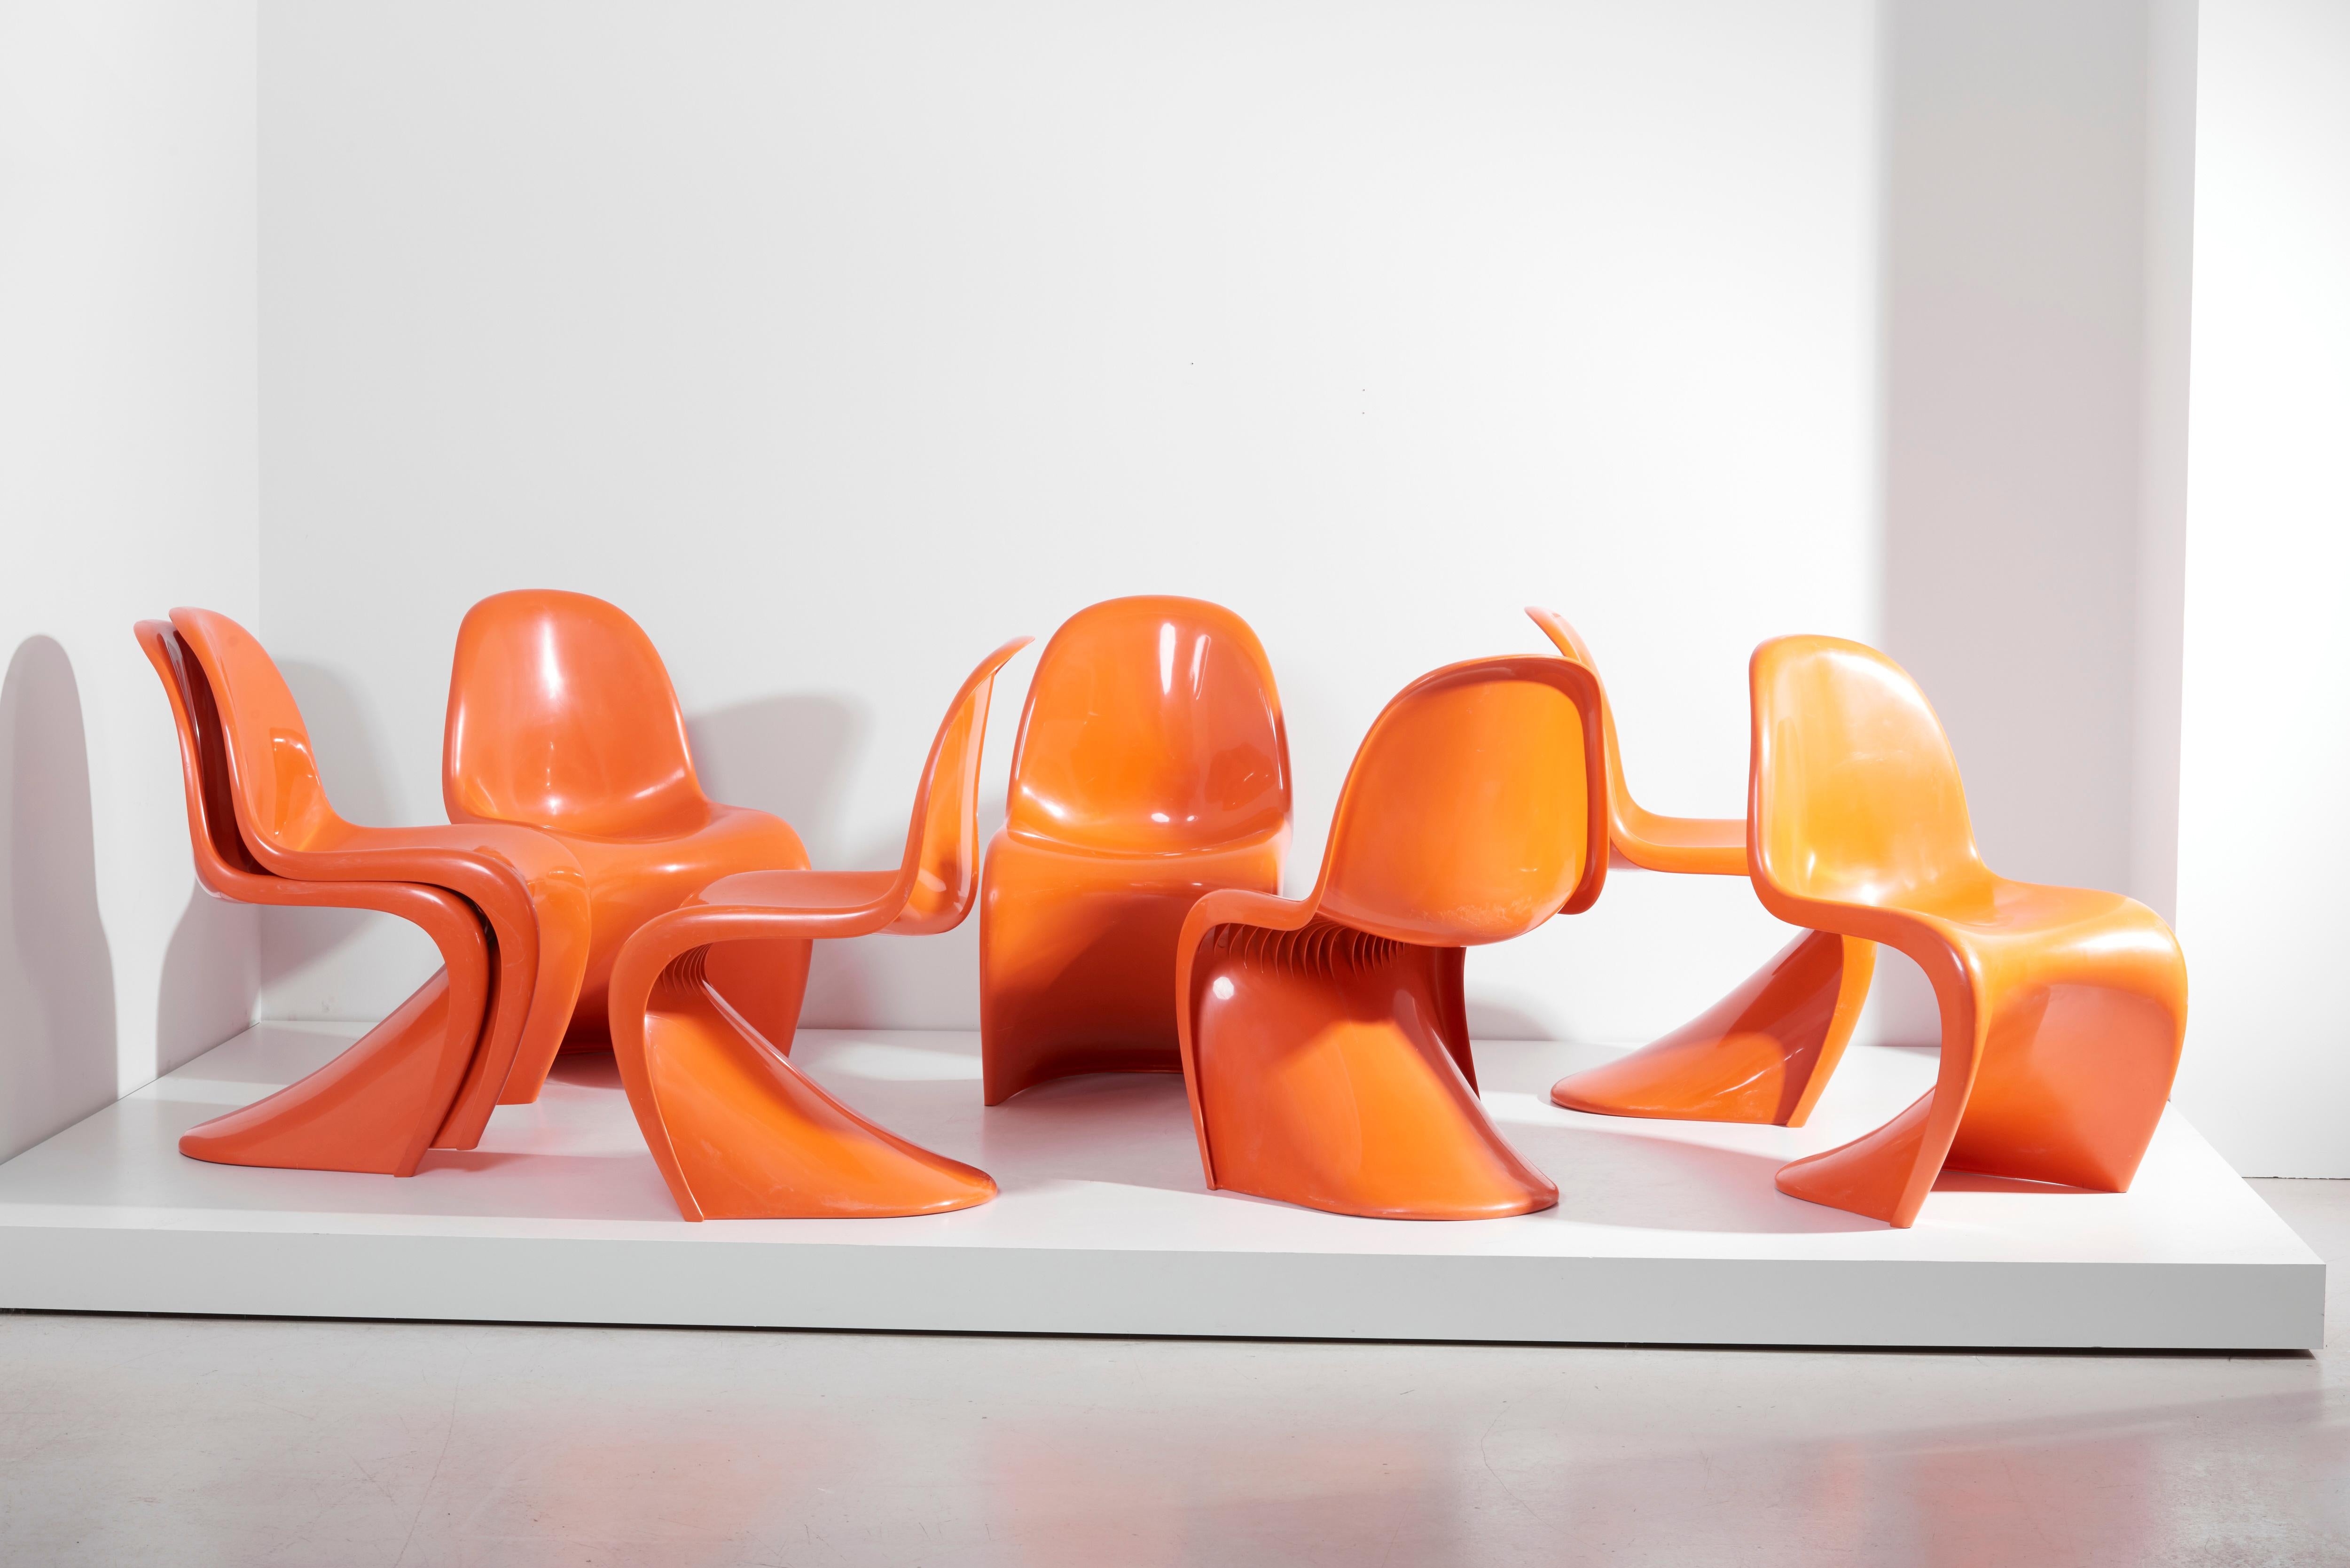 Set of 8 matching orange Panton chairs, designed by Verner Panton and manufactured in the 1970s by Fehlbaum in Switzerland in License of Herman Miller.
Made of molded plastic. Stackable and for indoor and outdoor use.